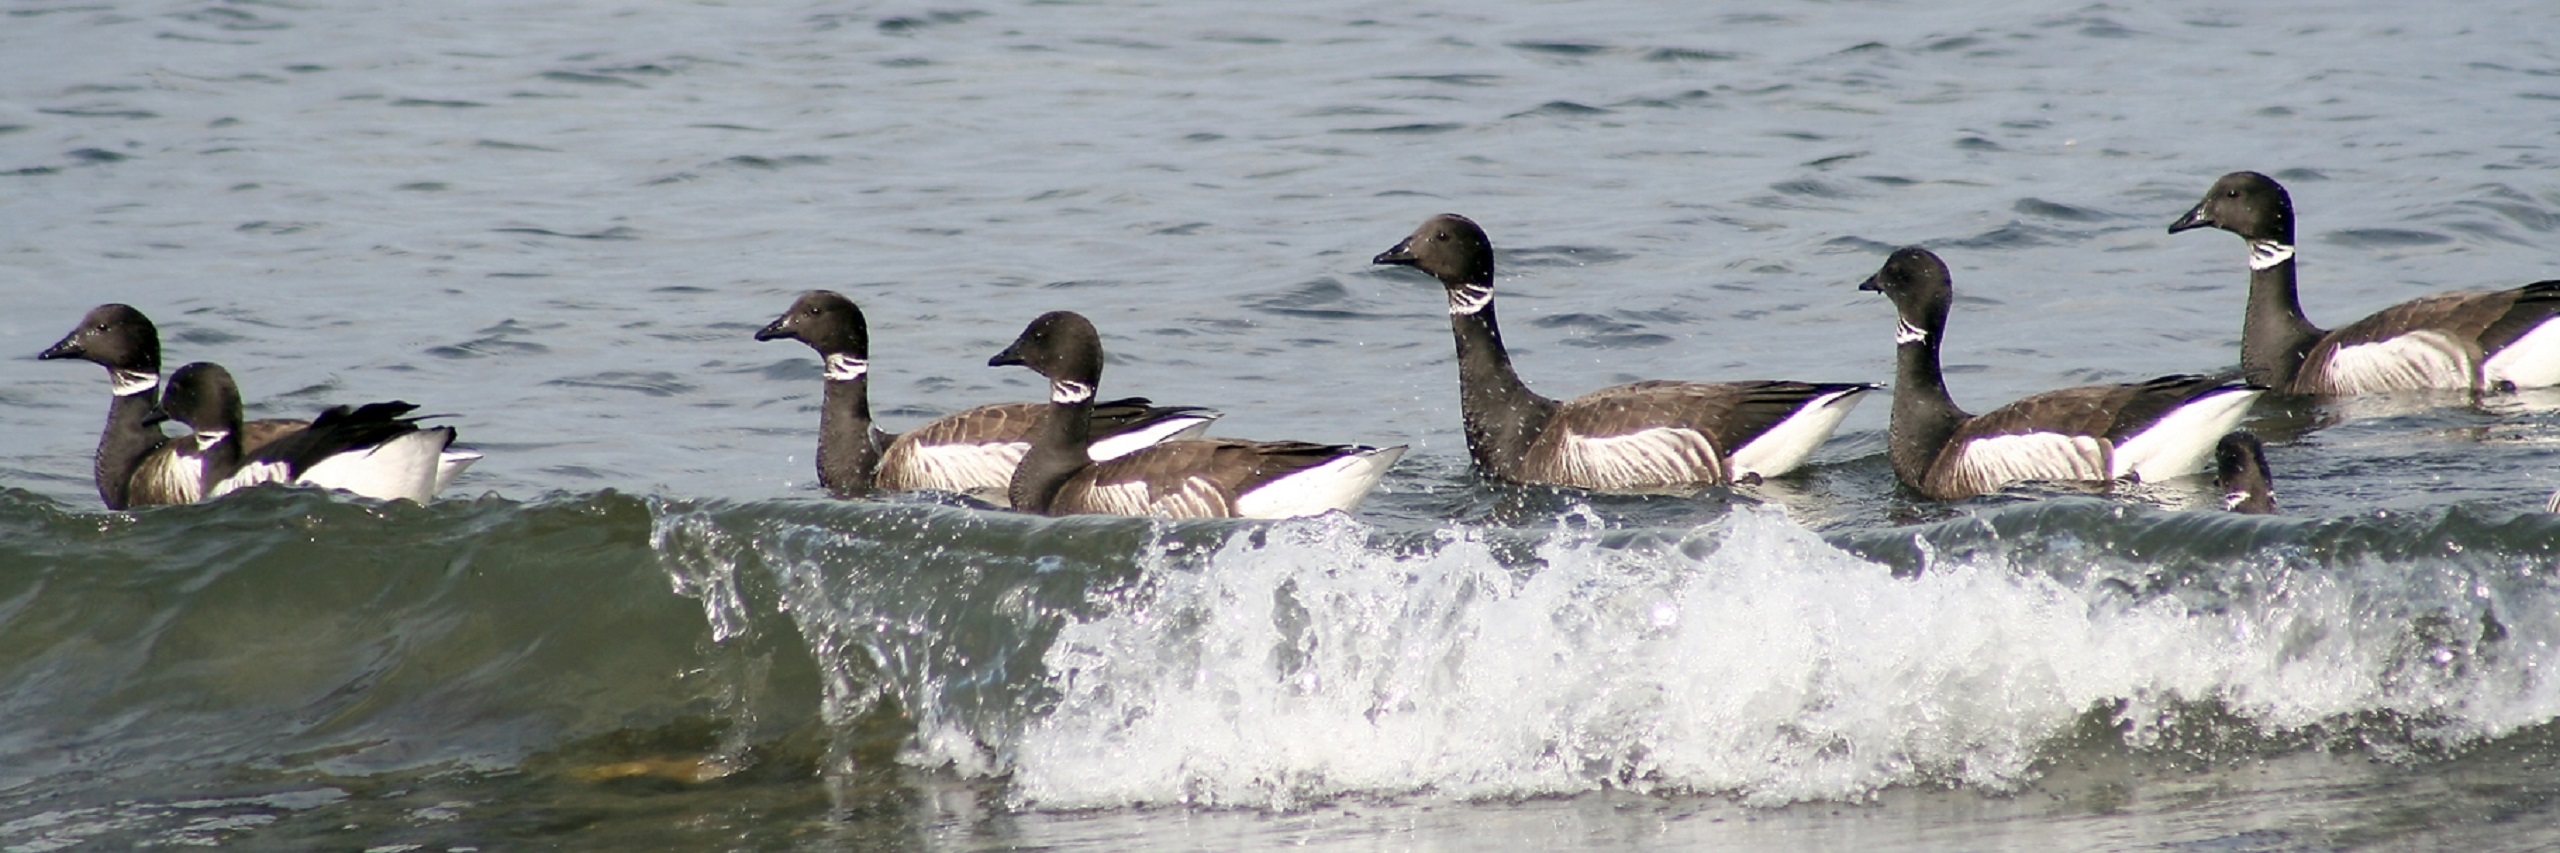 A Wave Passes a Group of Brant Geese 